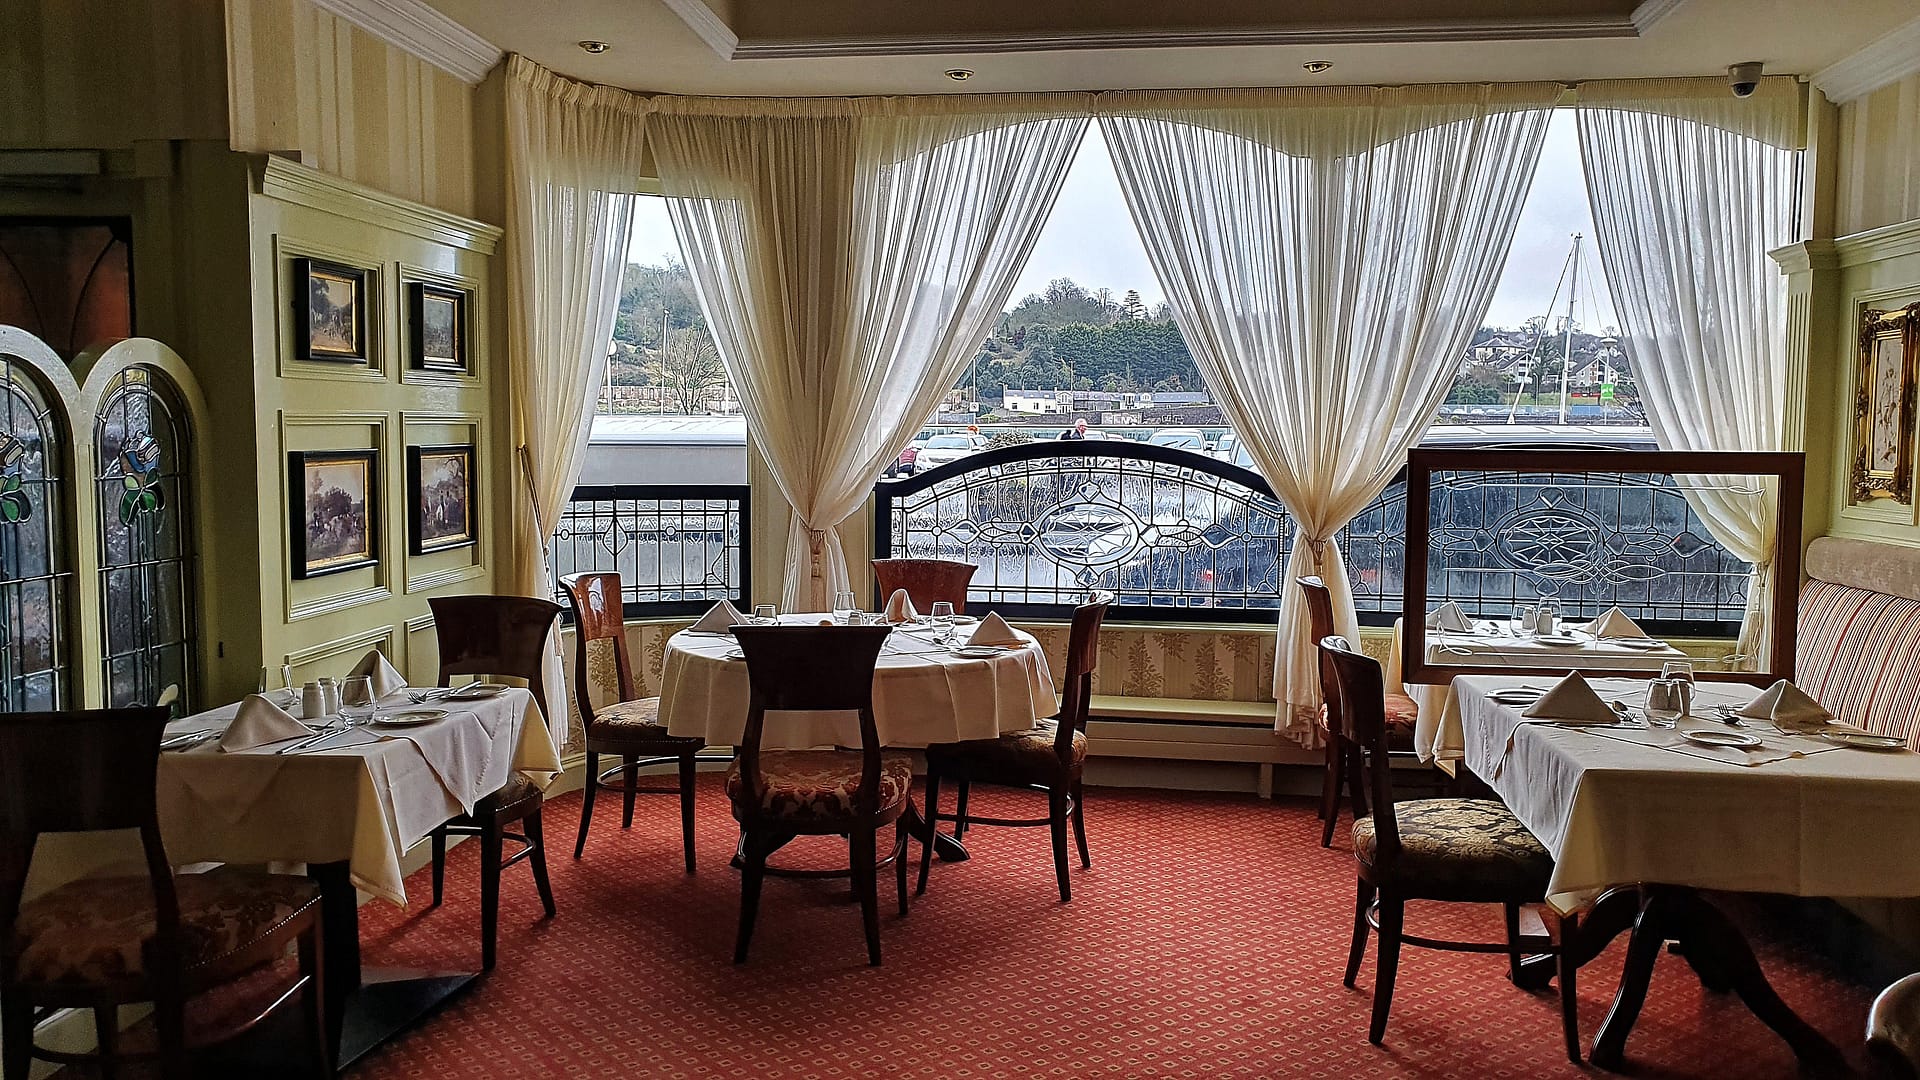 A view of the Bianconi Restaurant looking onto the Siur River.